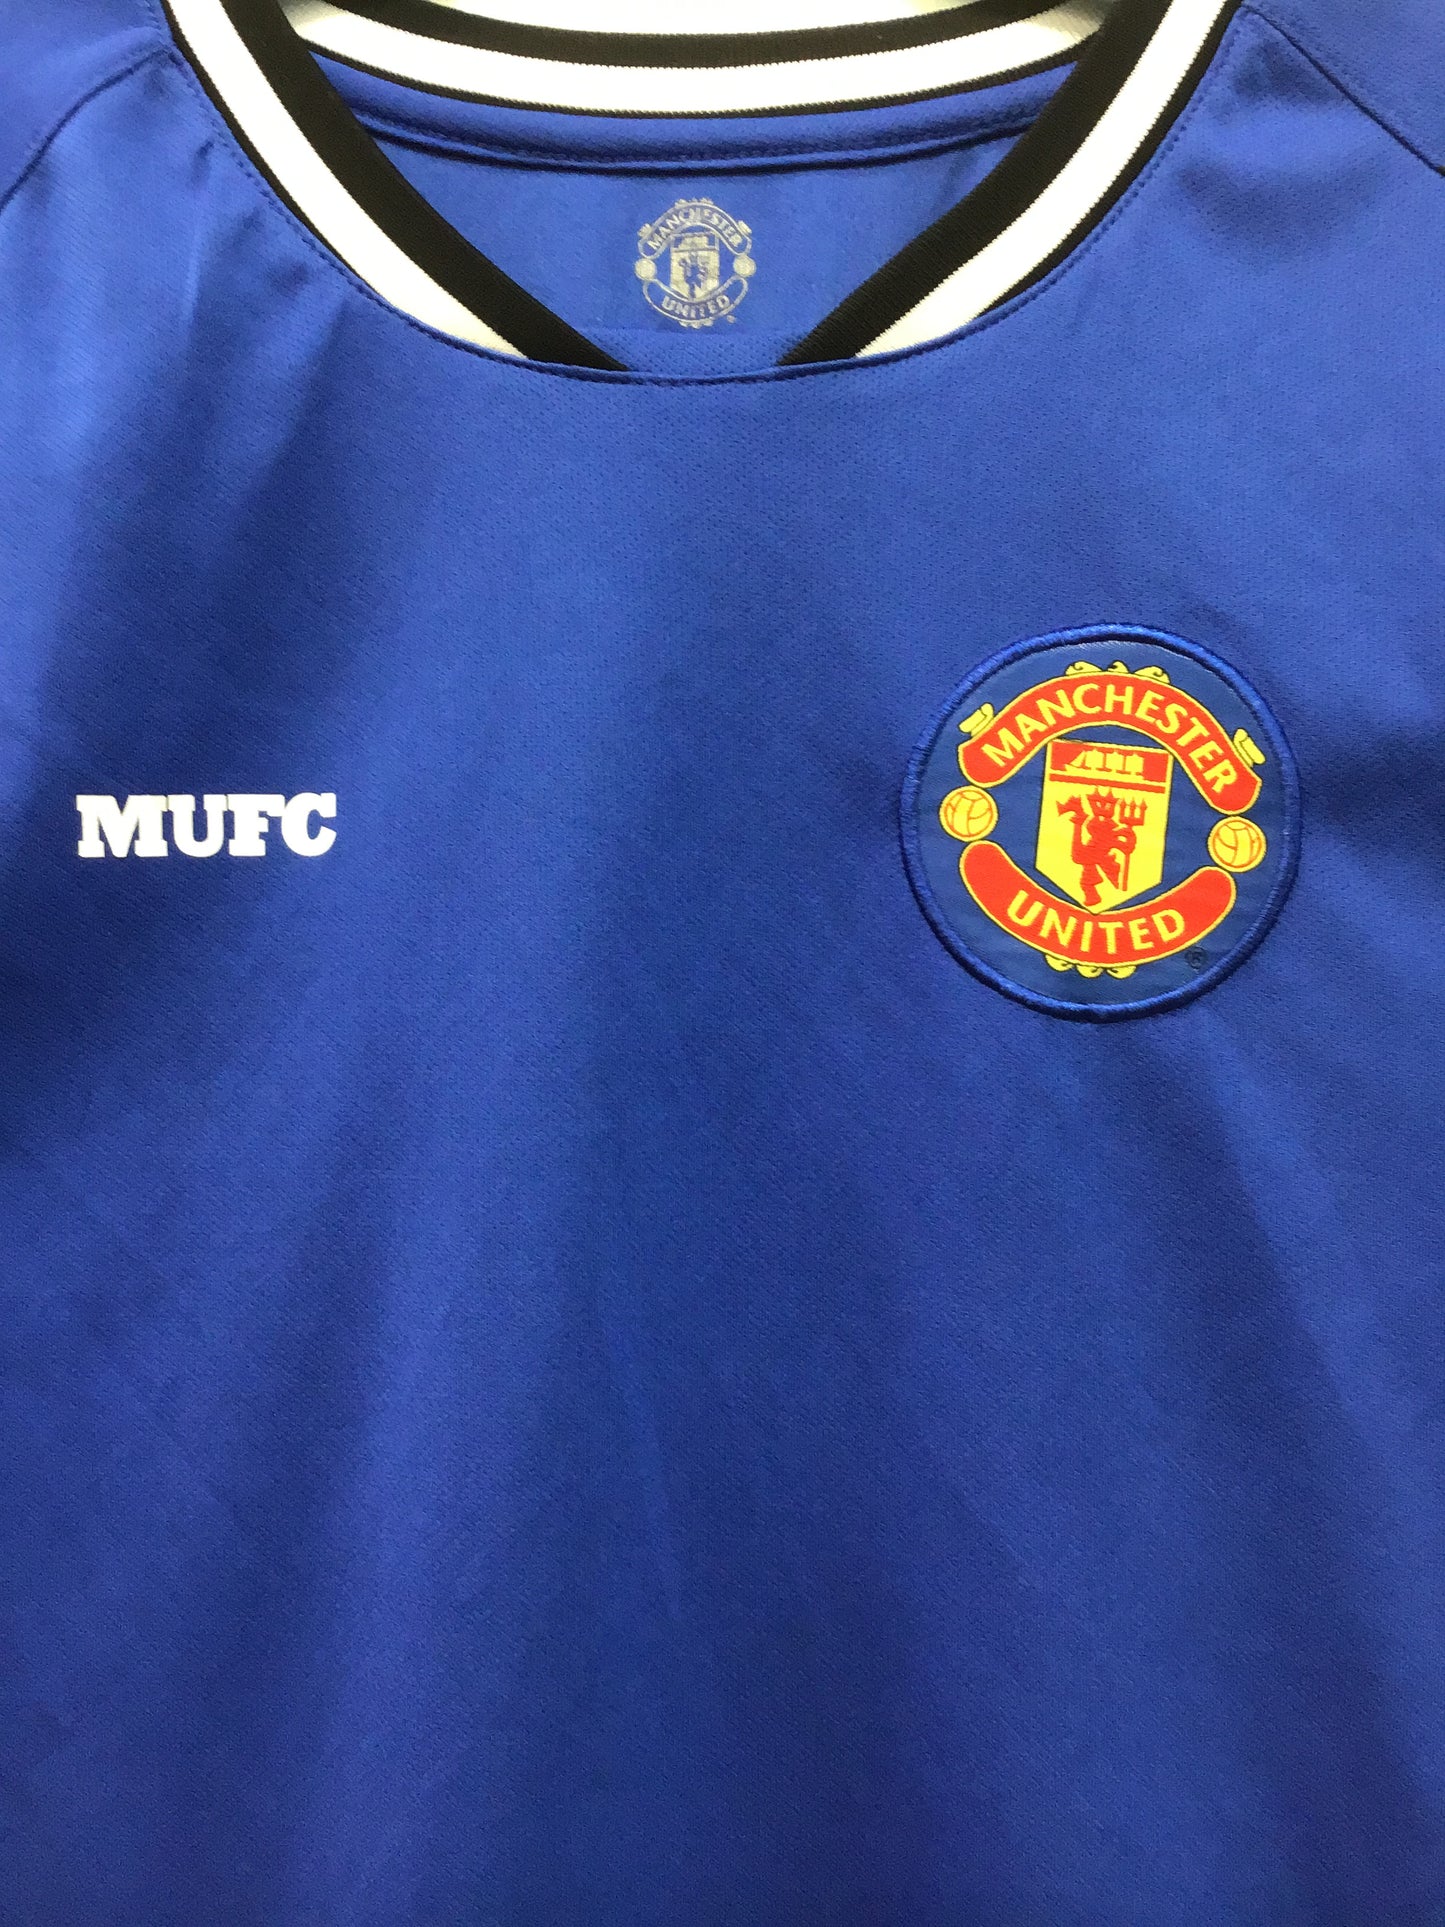 Retro Manchester United MUFC Jersey, Size M